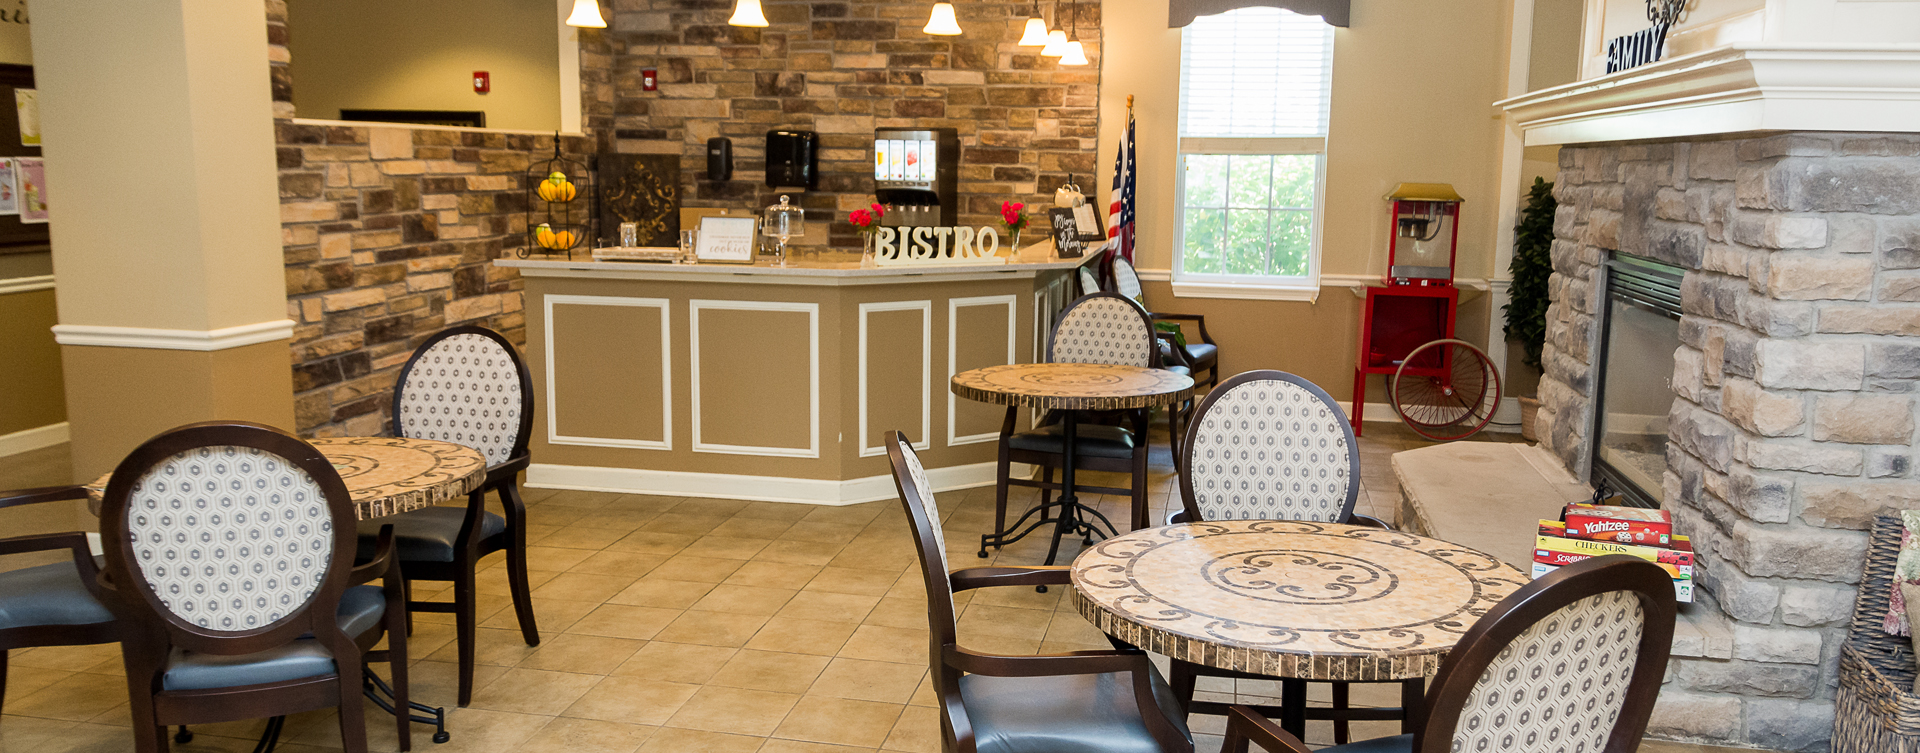 We’re serving up snacks, beverages and service around the clock in the bistro at Bickford of Oswego